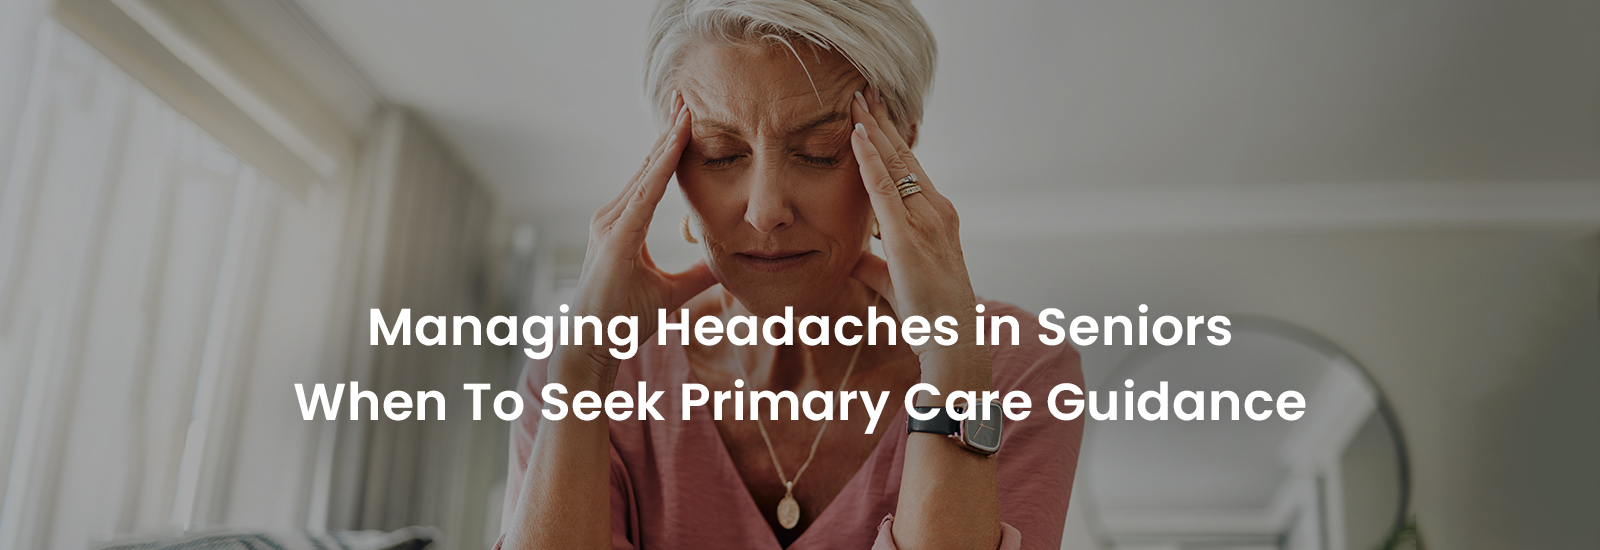 Managing Headaches in Seniors When To Seek Primary Care Guidance | Banner Image